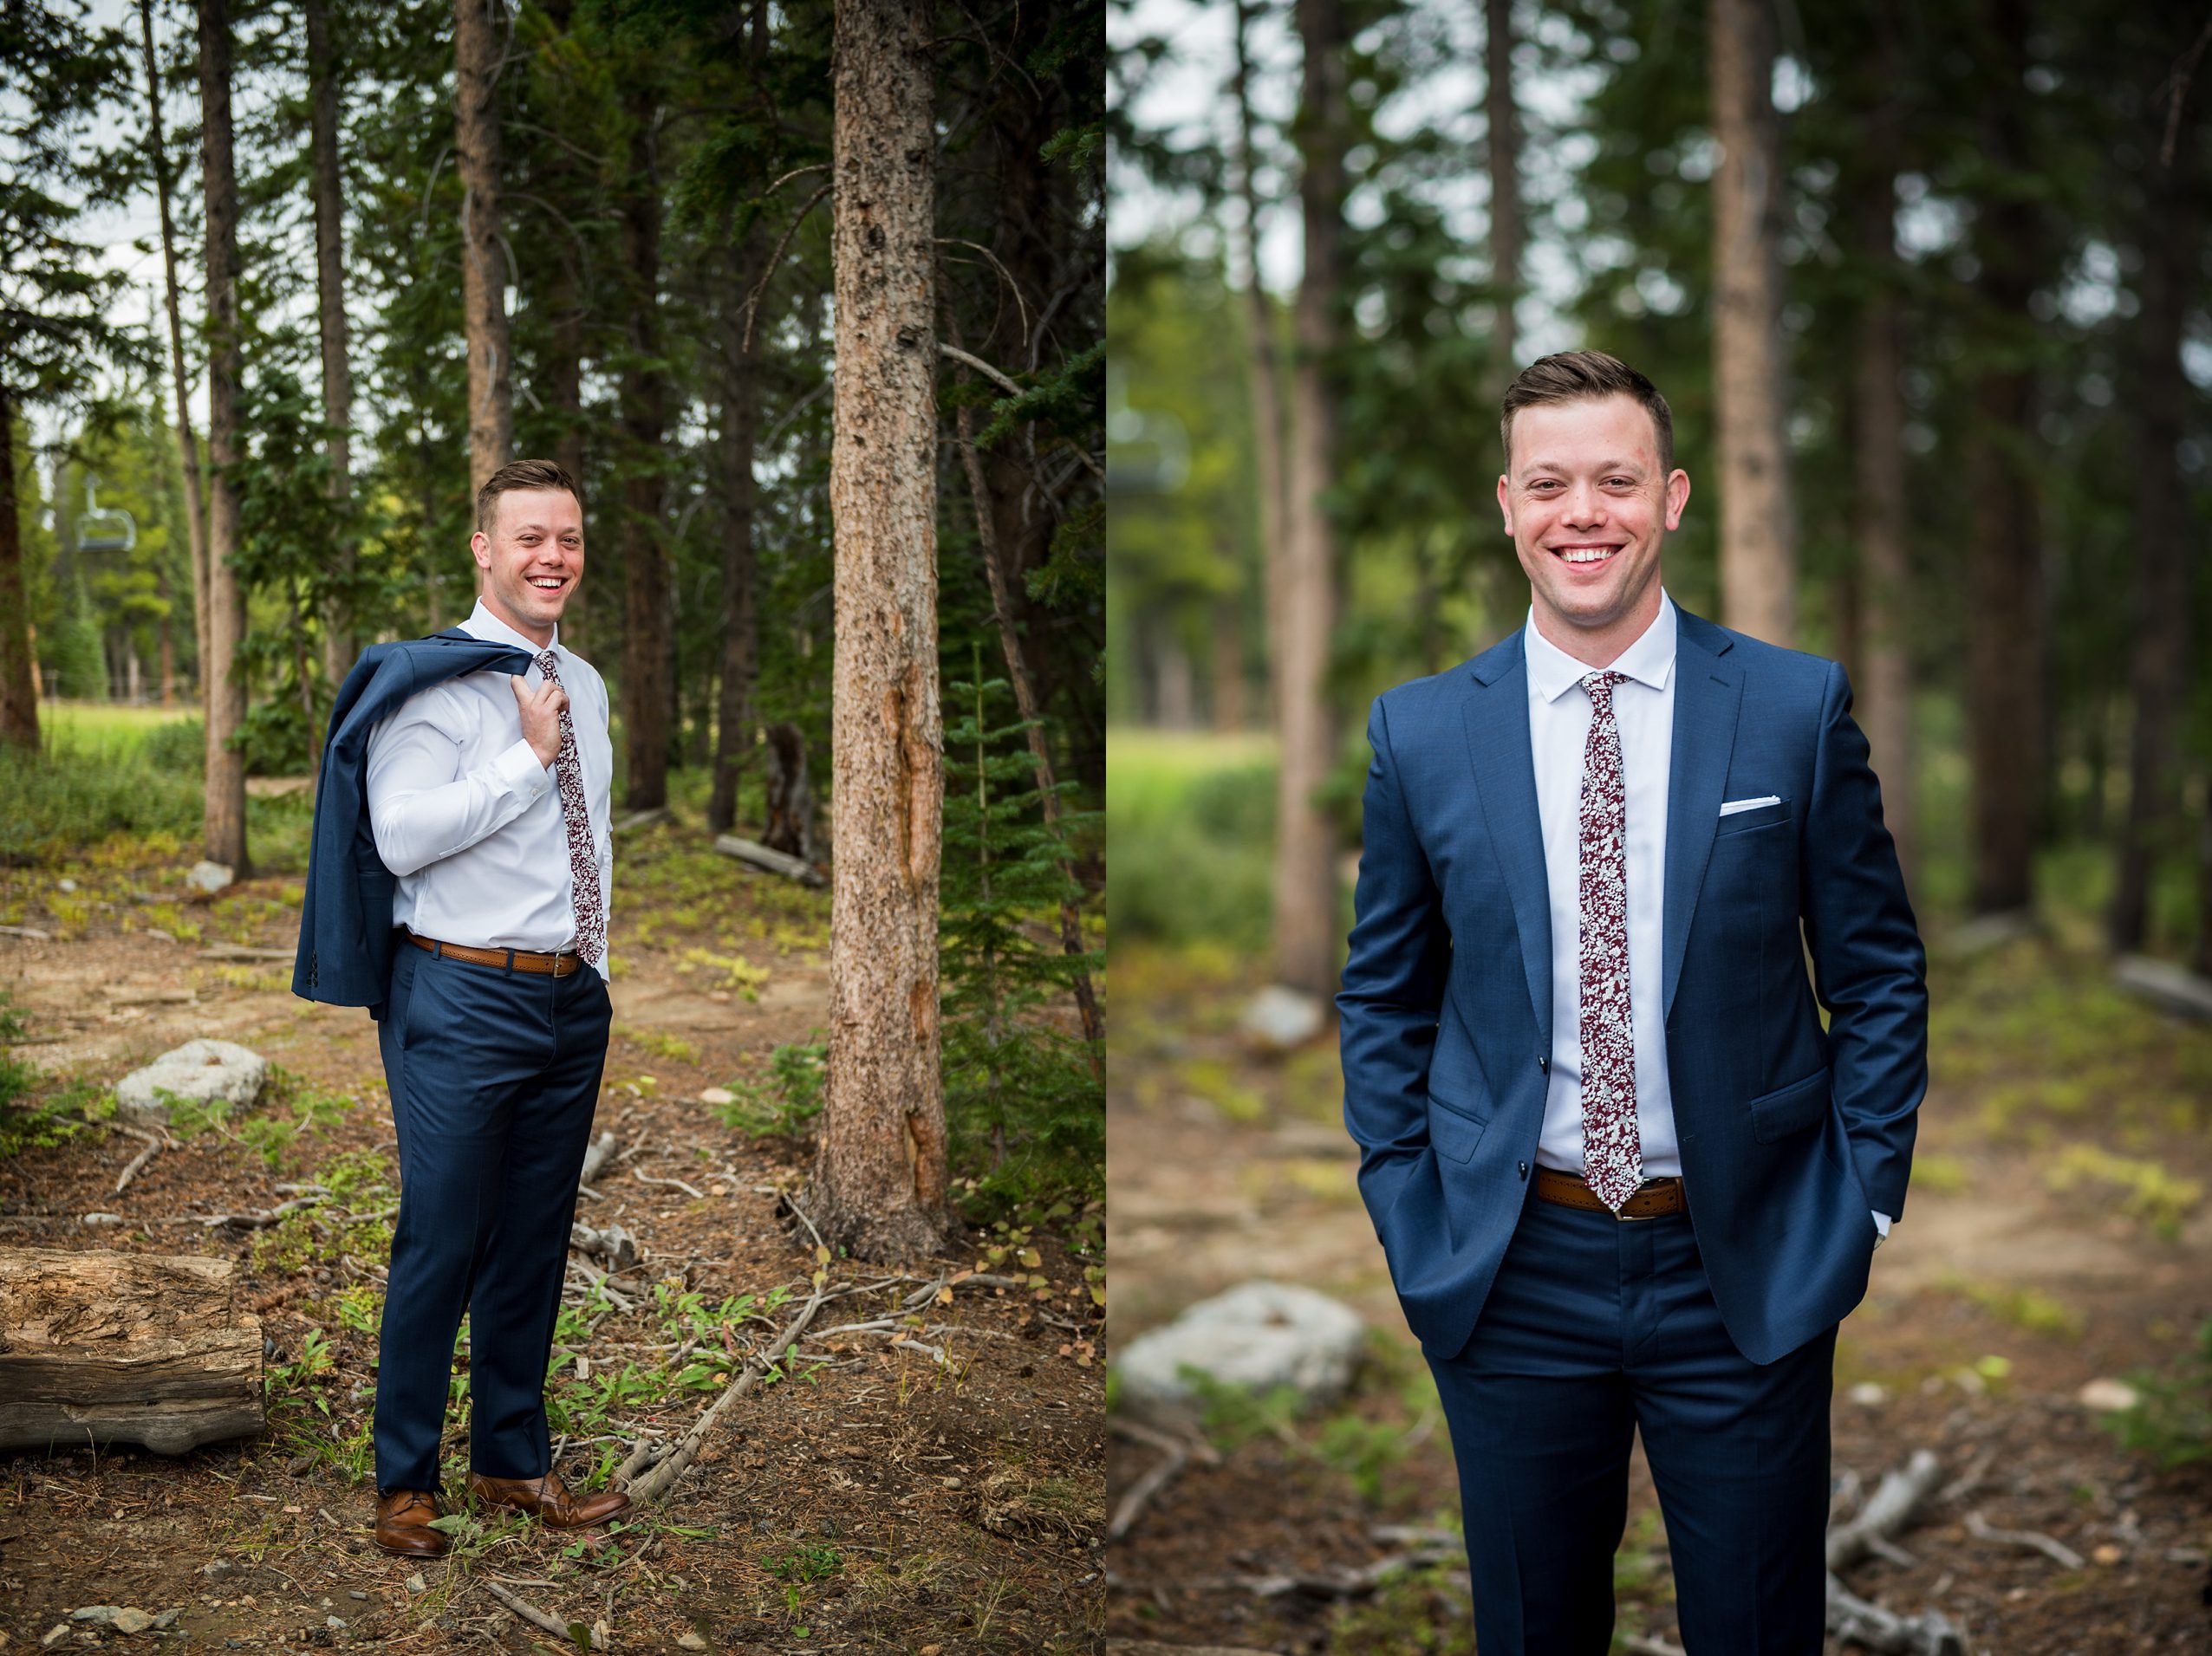 Groom photos at ten mile station